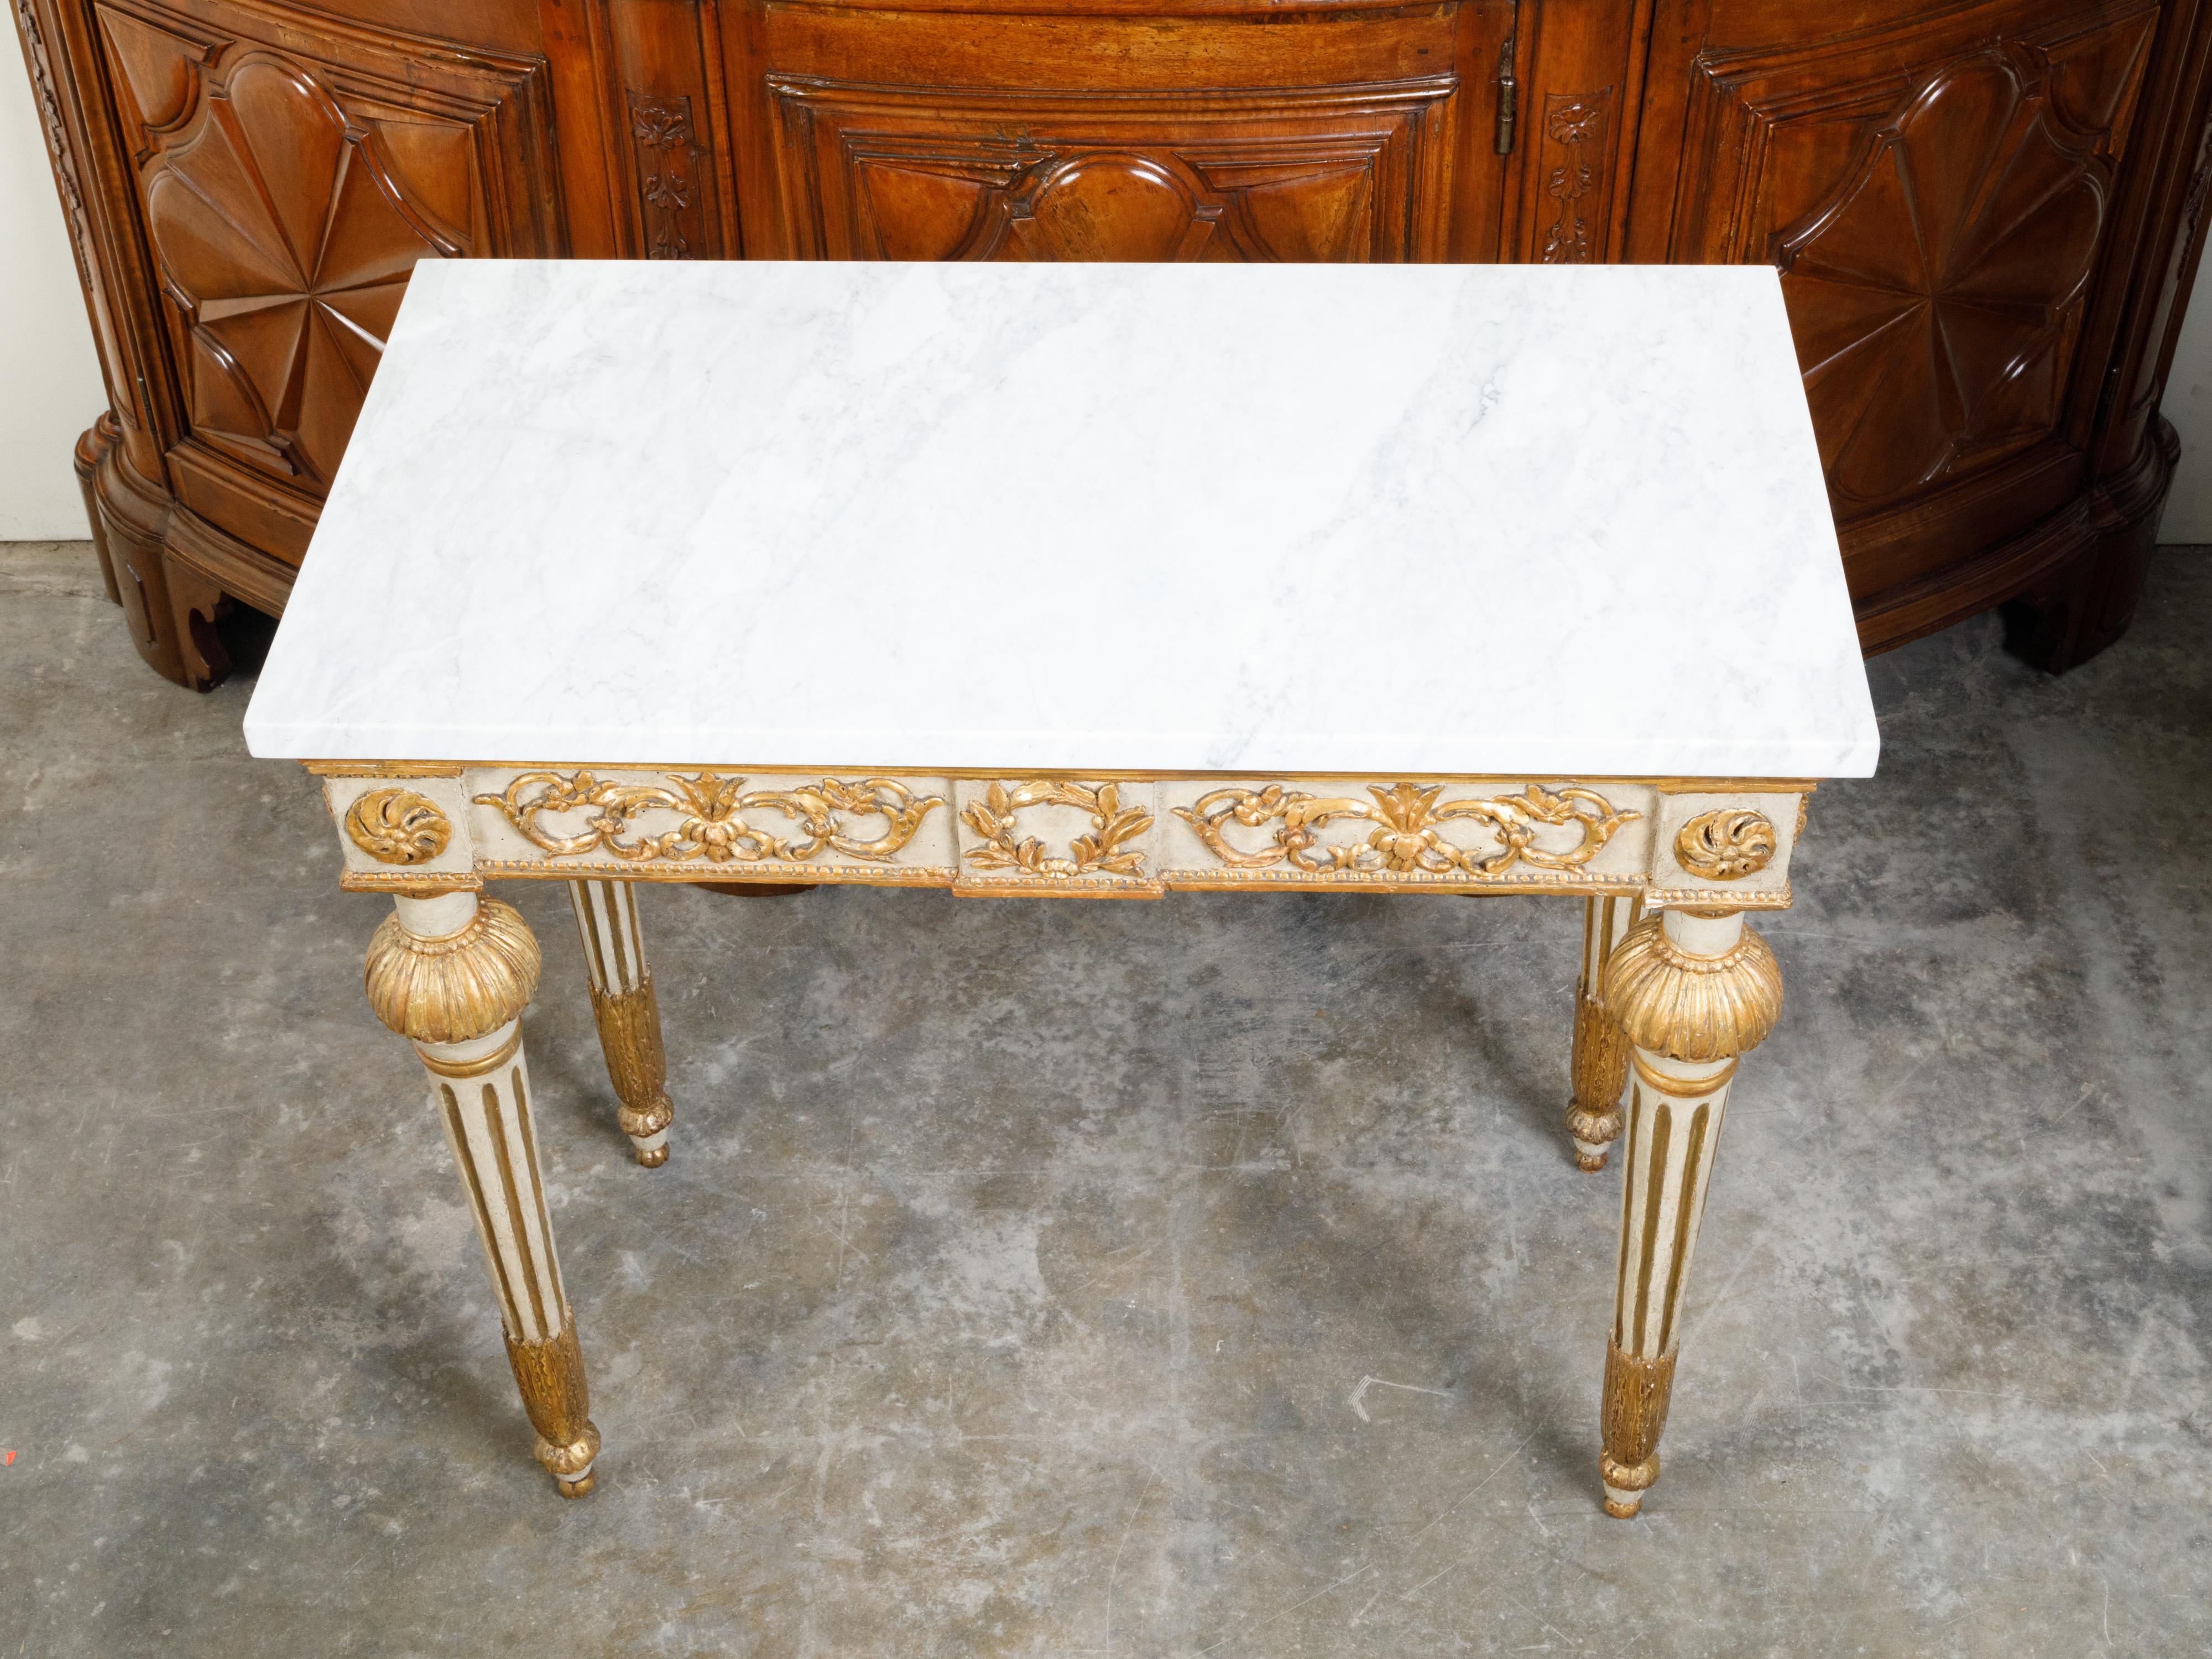 Italian 18th Century Neoclassical Carved and Gilt Console Table with Marble Top For Sale 3